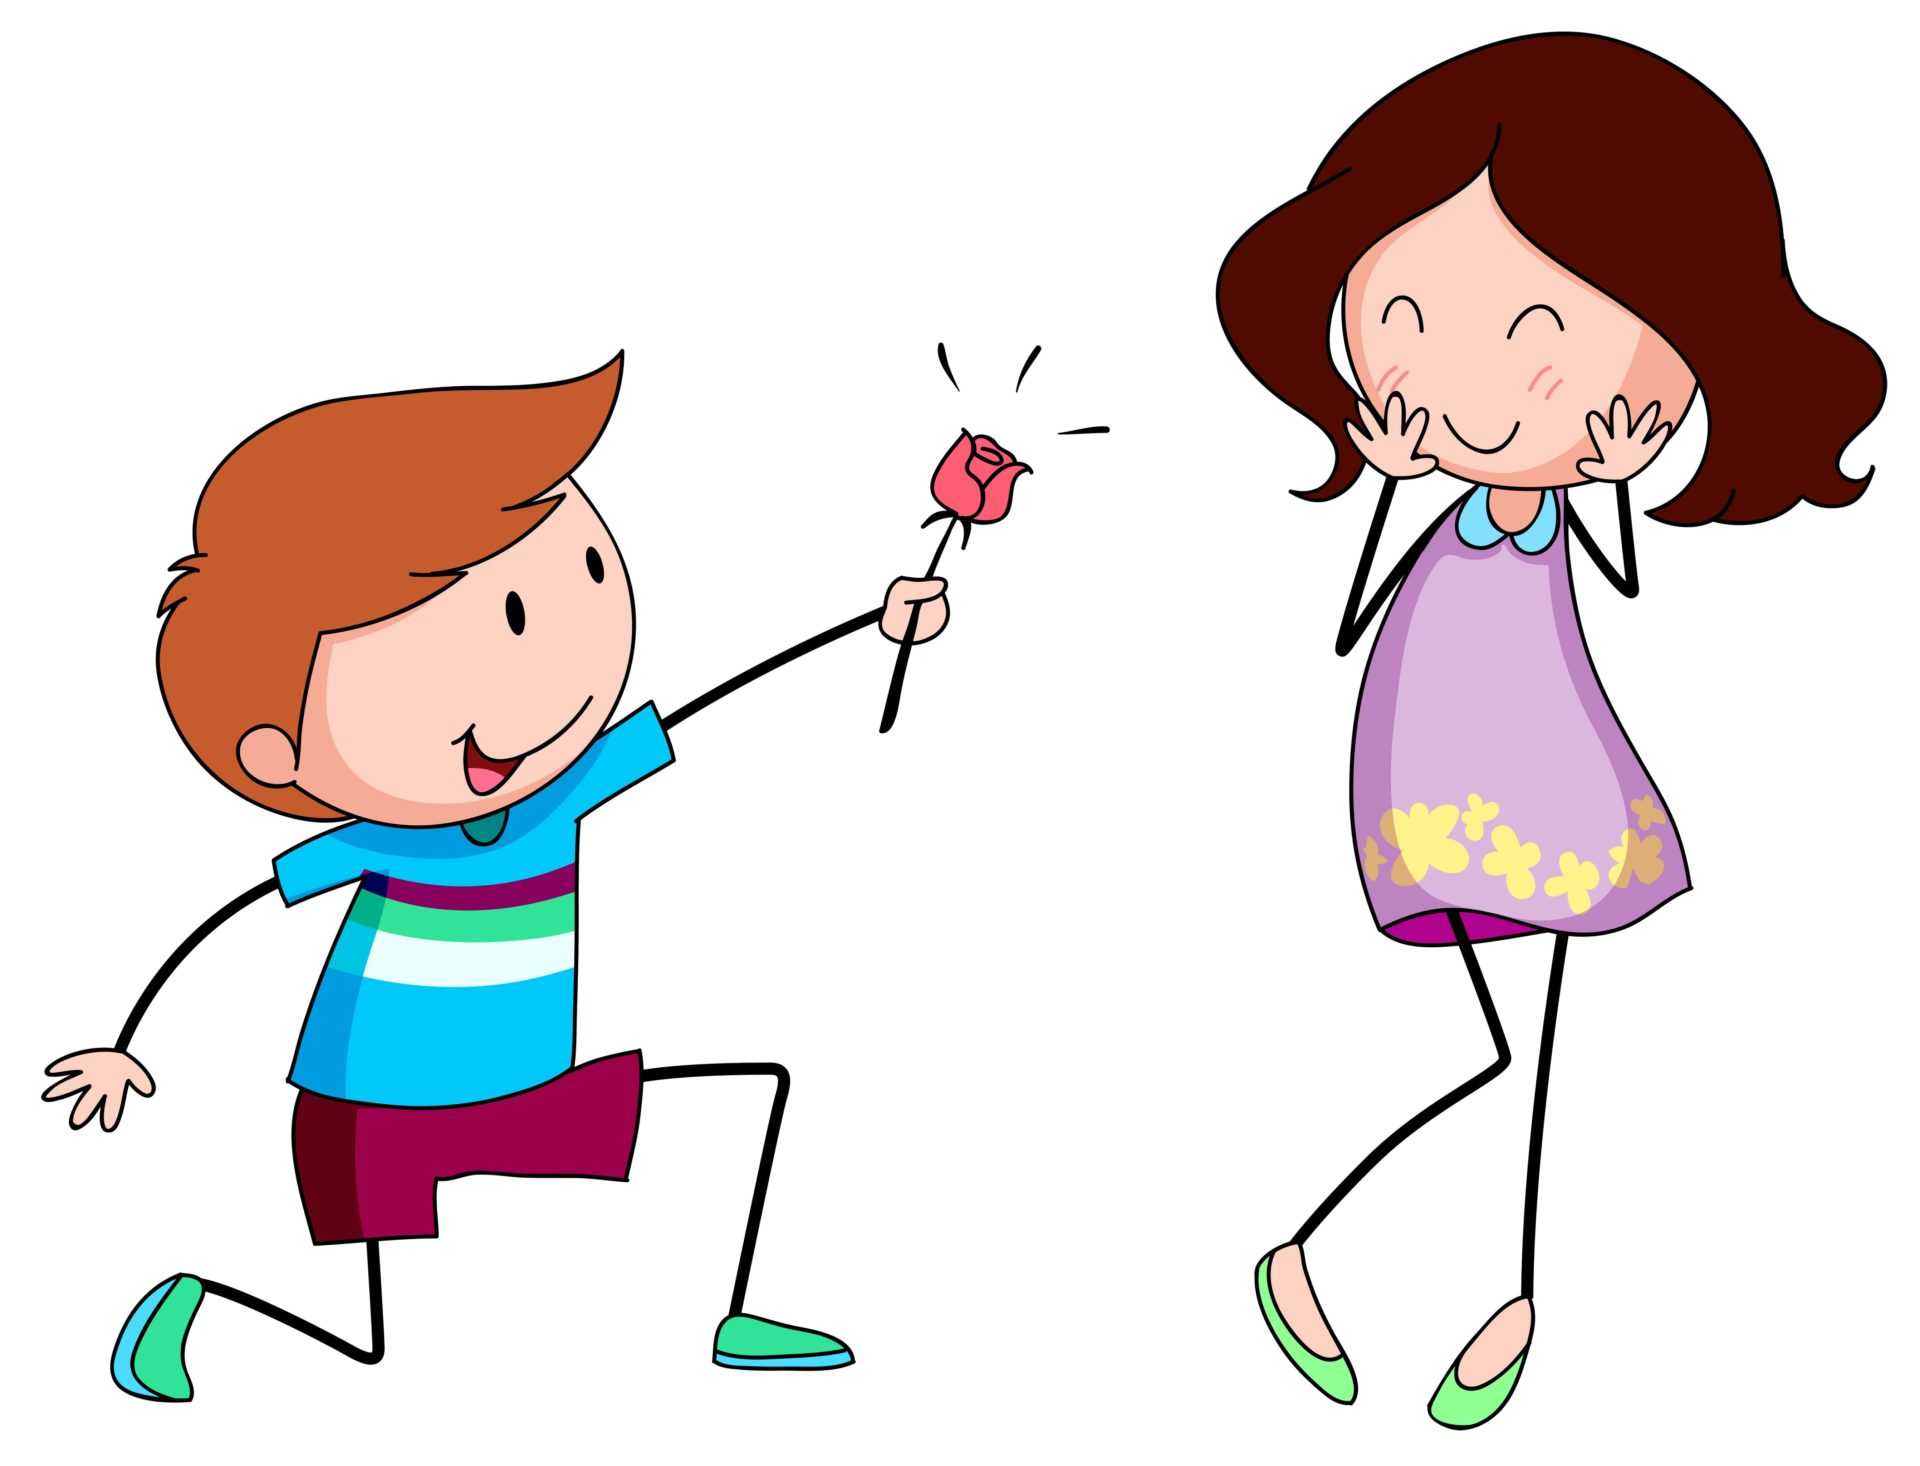  boy giving a rose to a girl